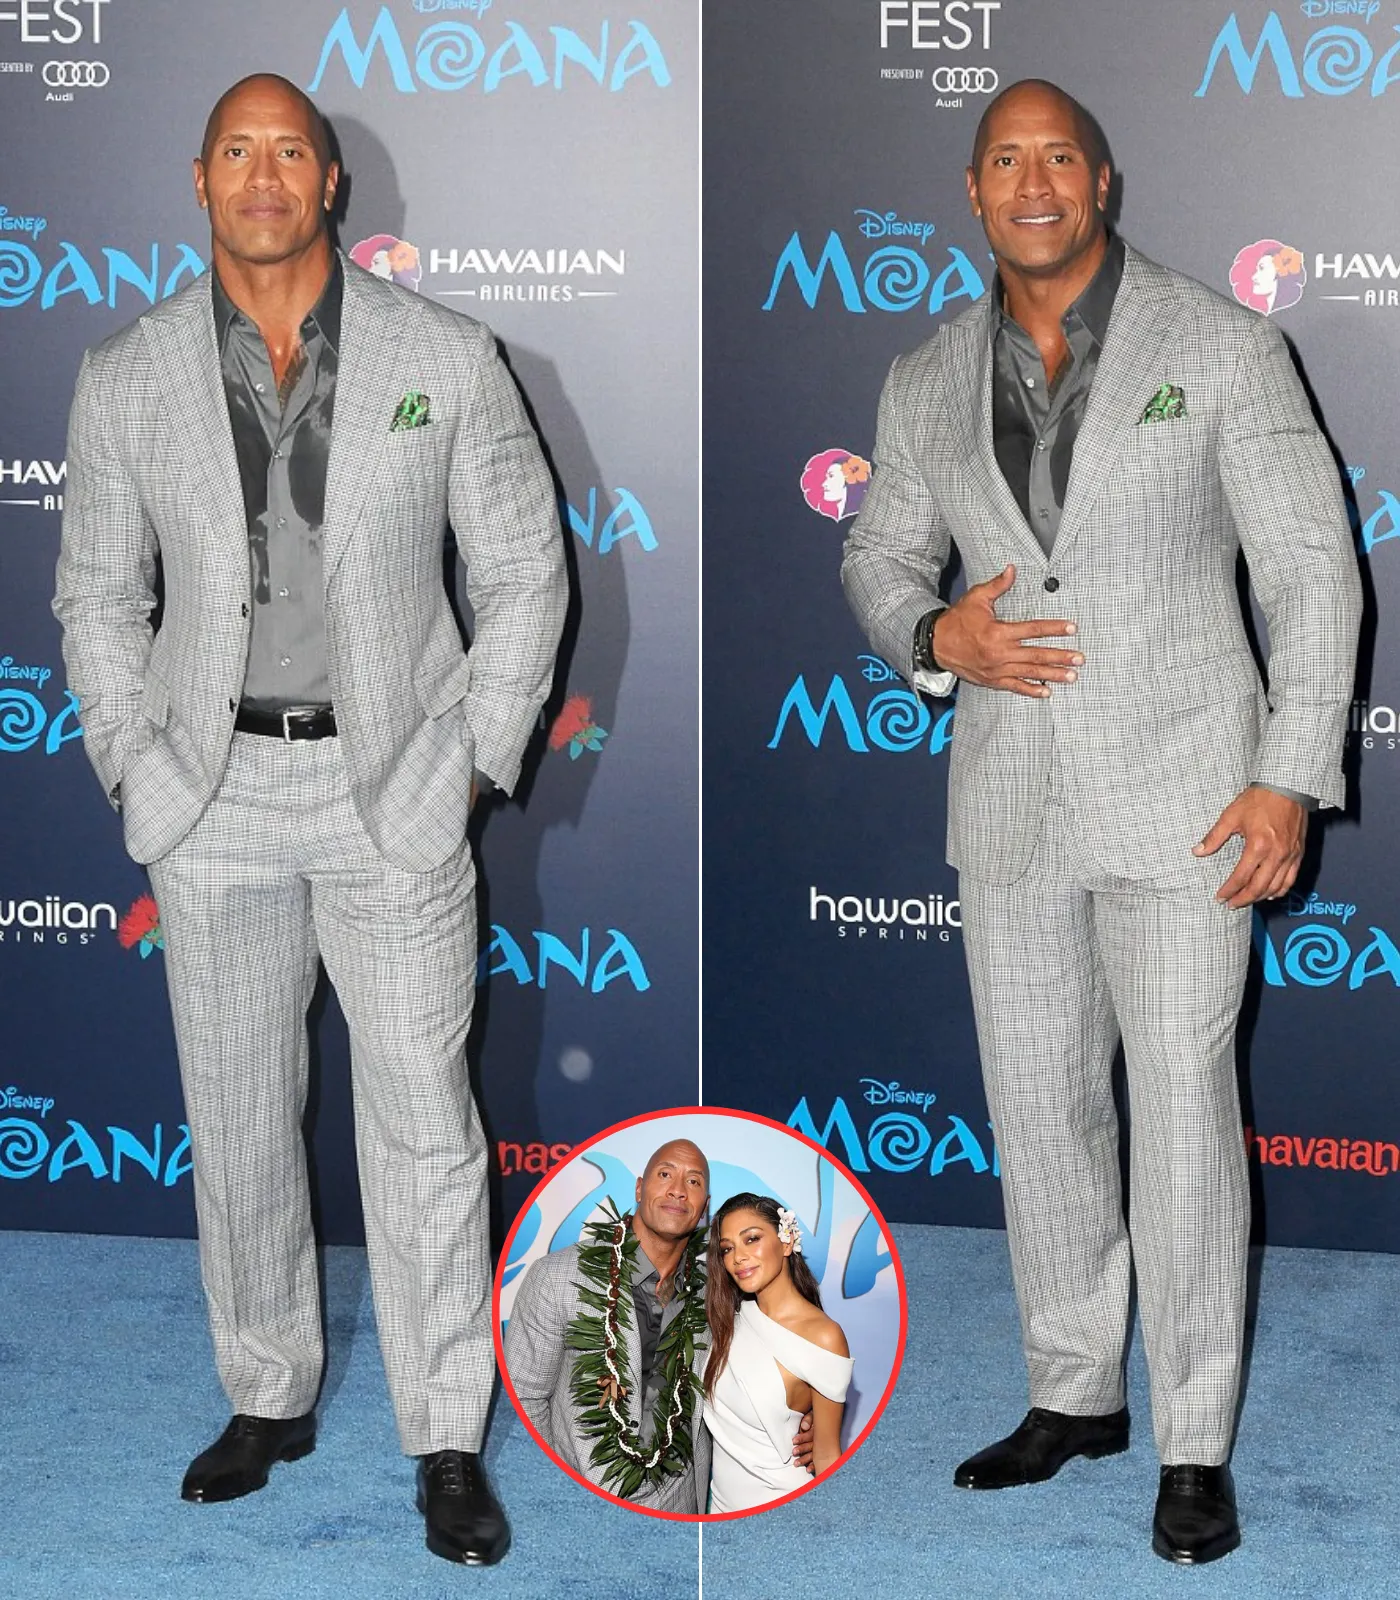 Dwayne Johnson gets very hot and bothered on the Moana premiere red carpet sweating through his suit